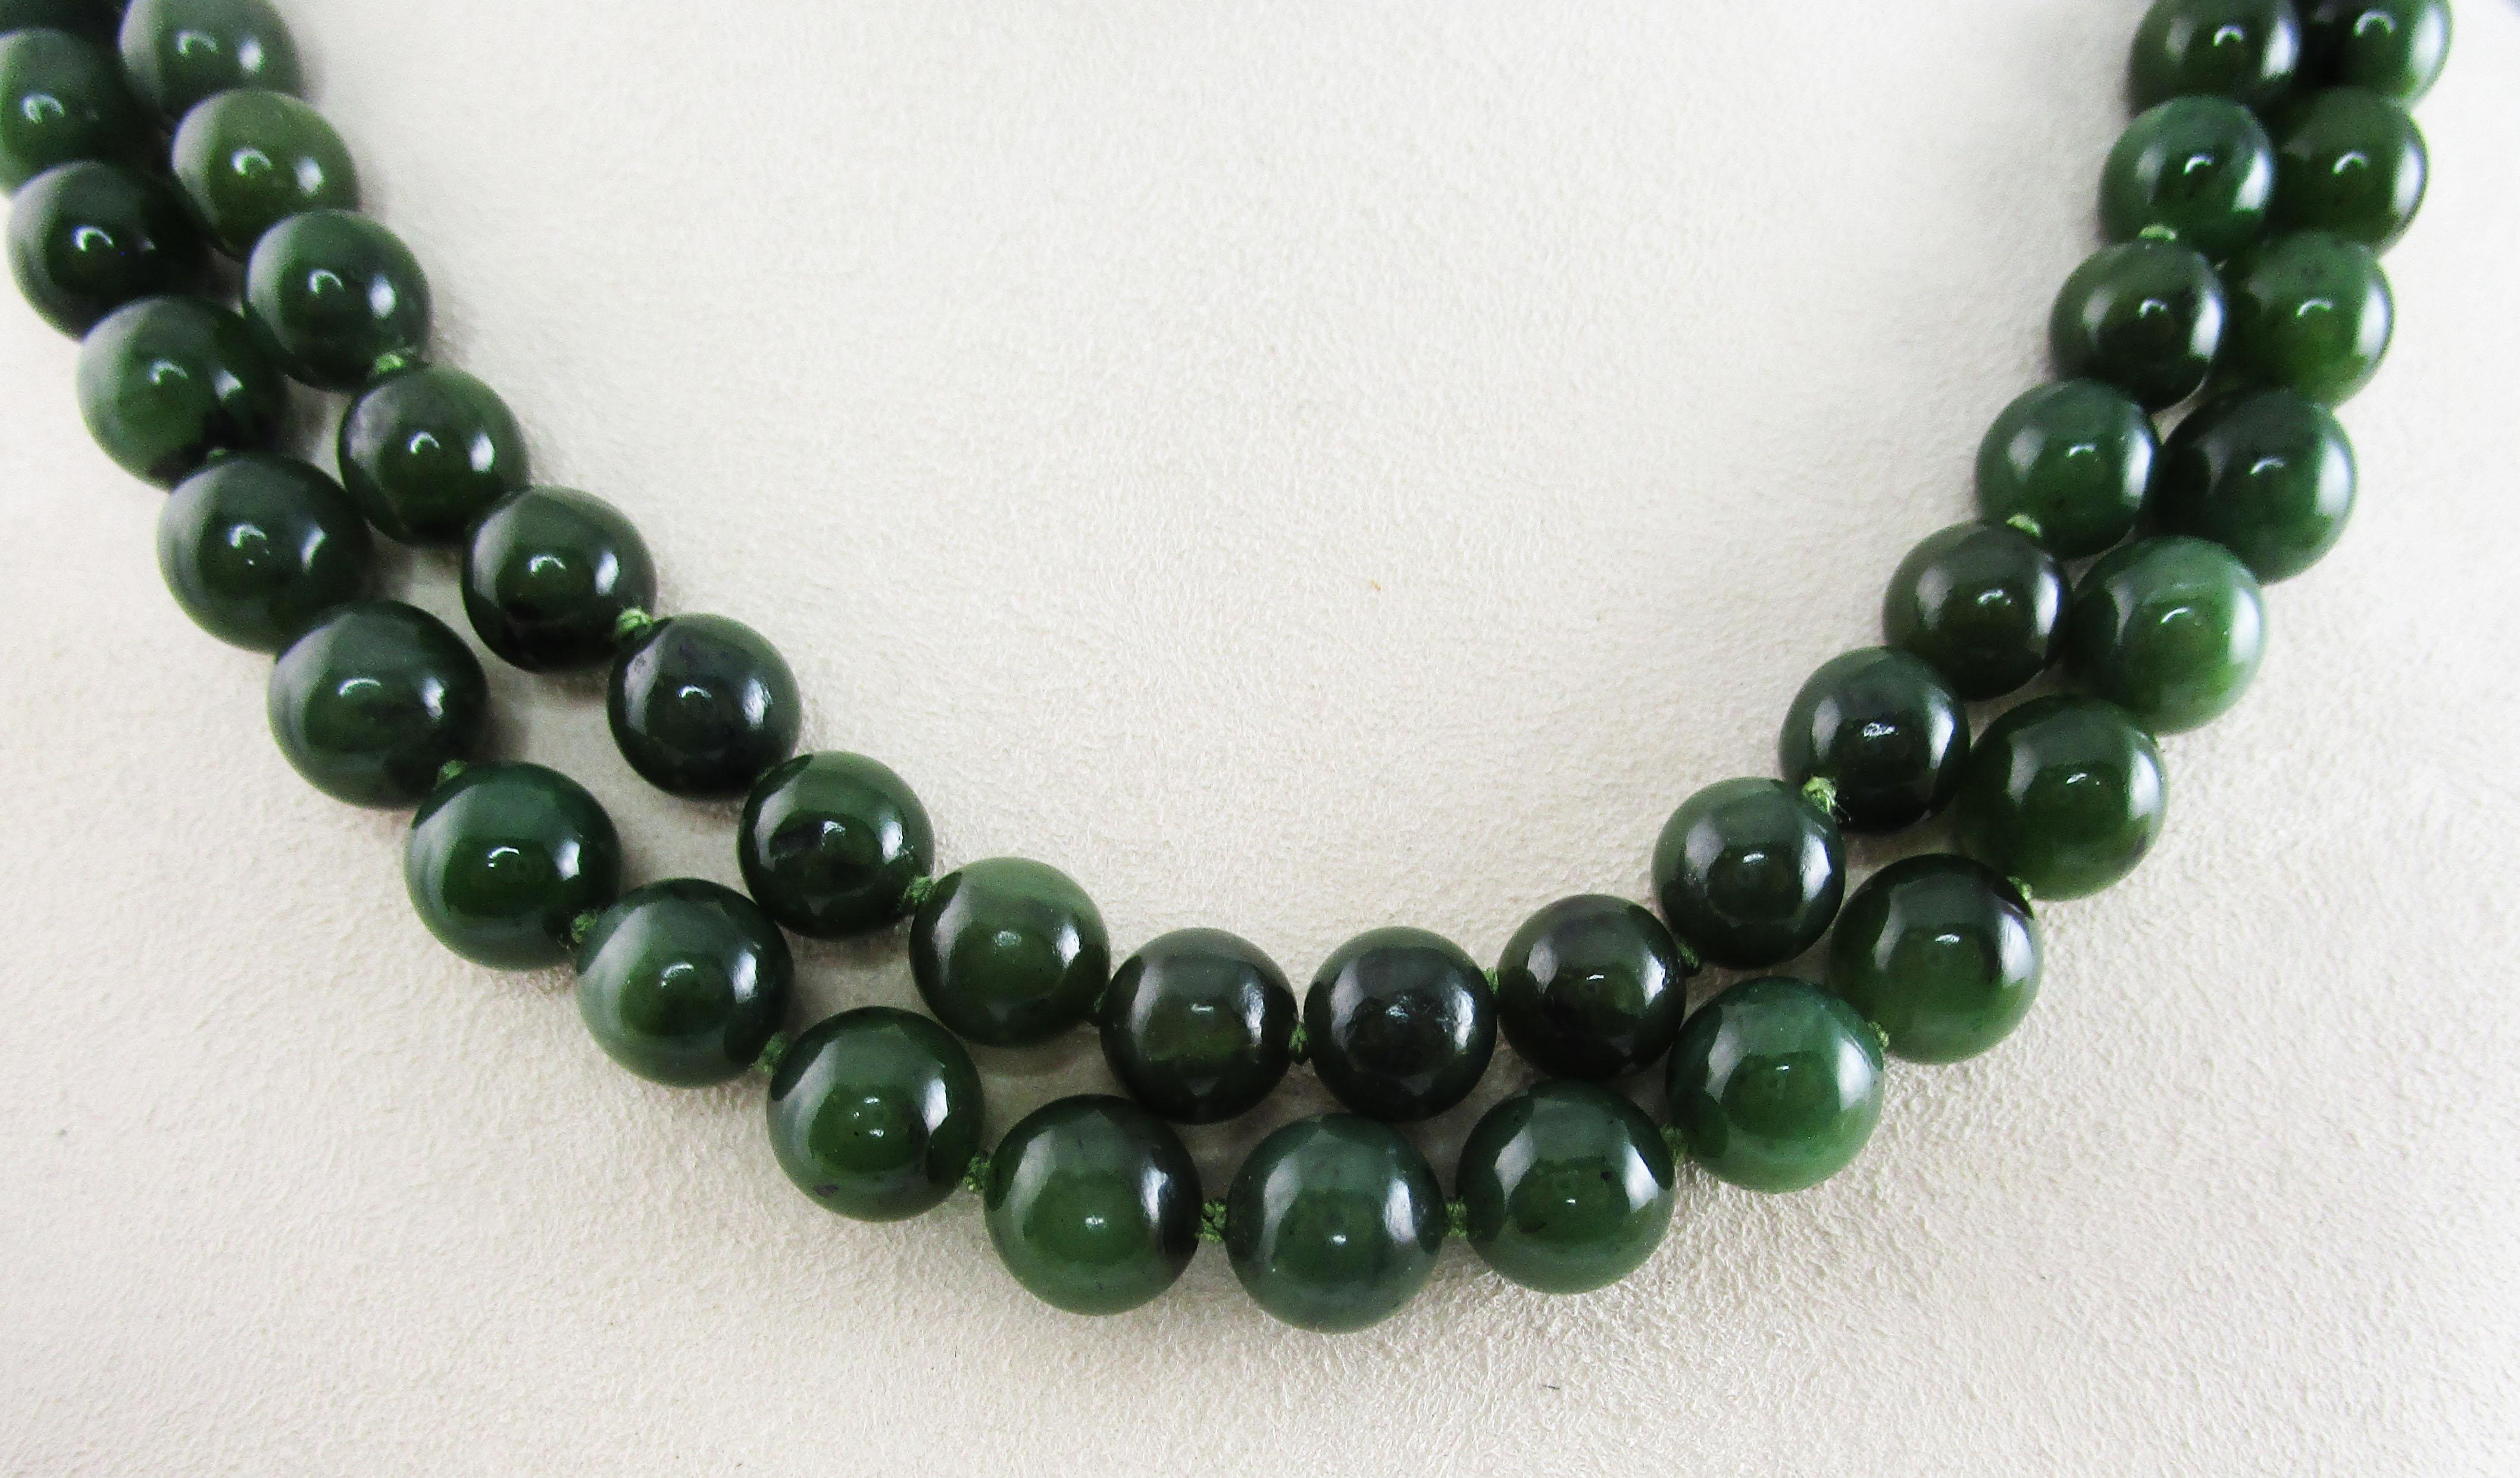 This is an absolutely remarkable mid-century necklace featuring a double strand of fine jade beads and a stunning 14k yellow gold clasp set with a dramatic jade cabochon! The jade of these beads is a deep forest green that has an excellent shine and